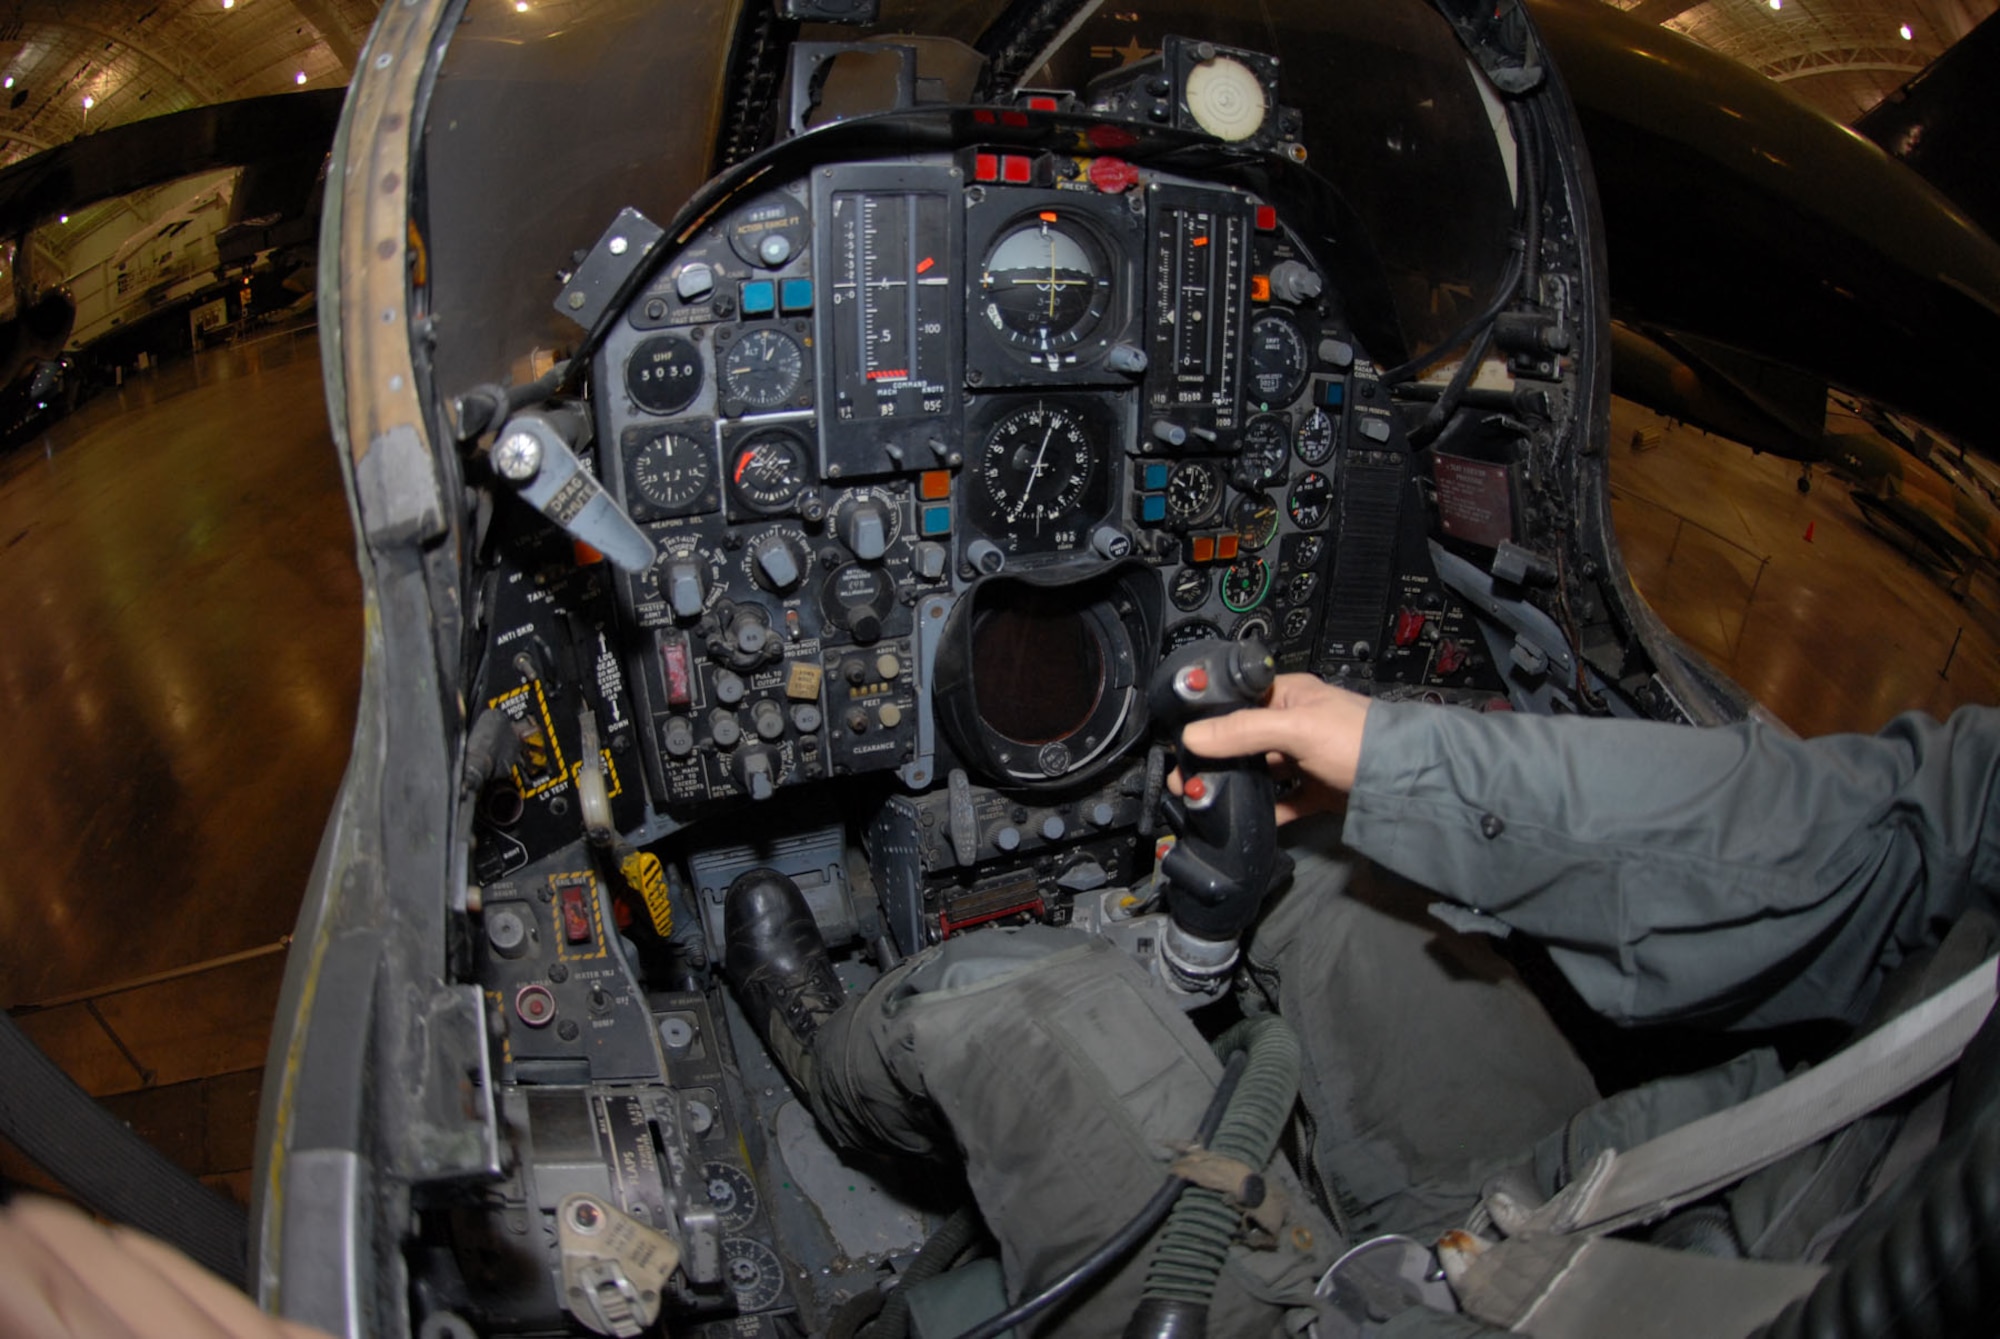 DAYTON, Ohio - Republic F-105G cockpit at the National Museum of the U.S. Air Force. (U.S. Air Force photo)